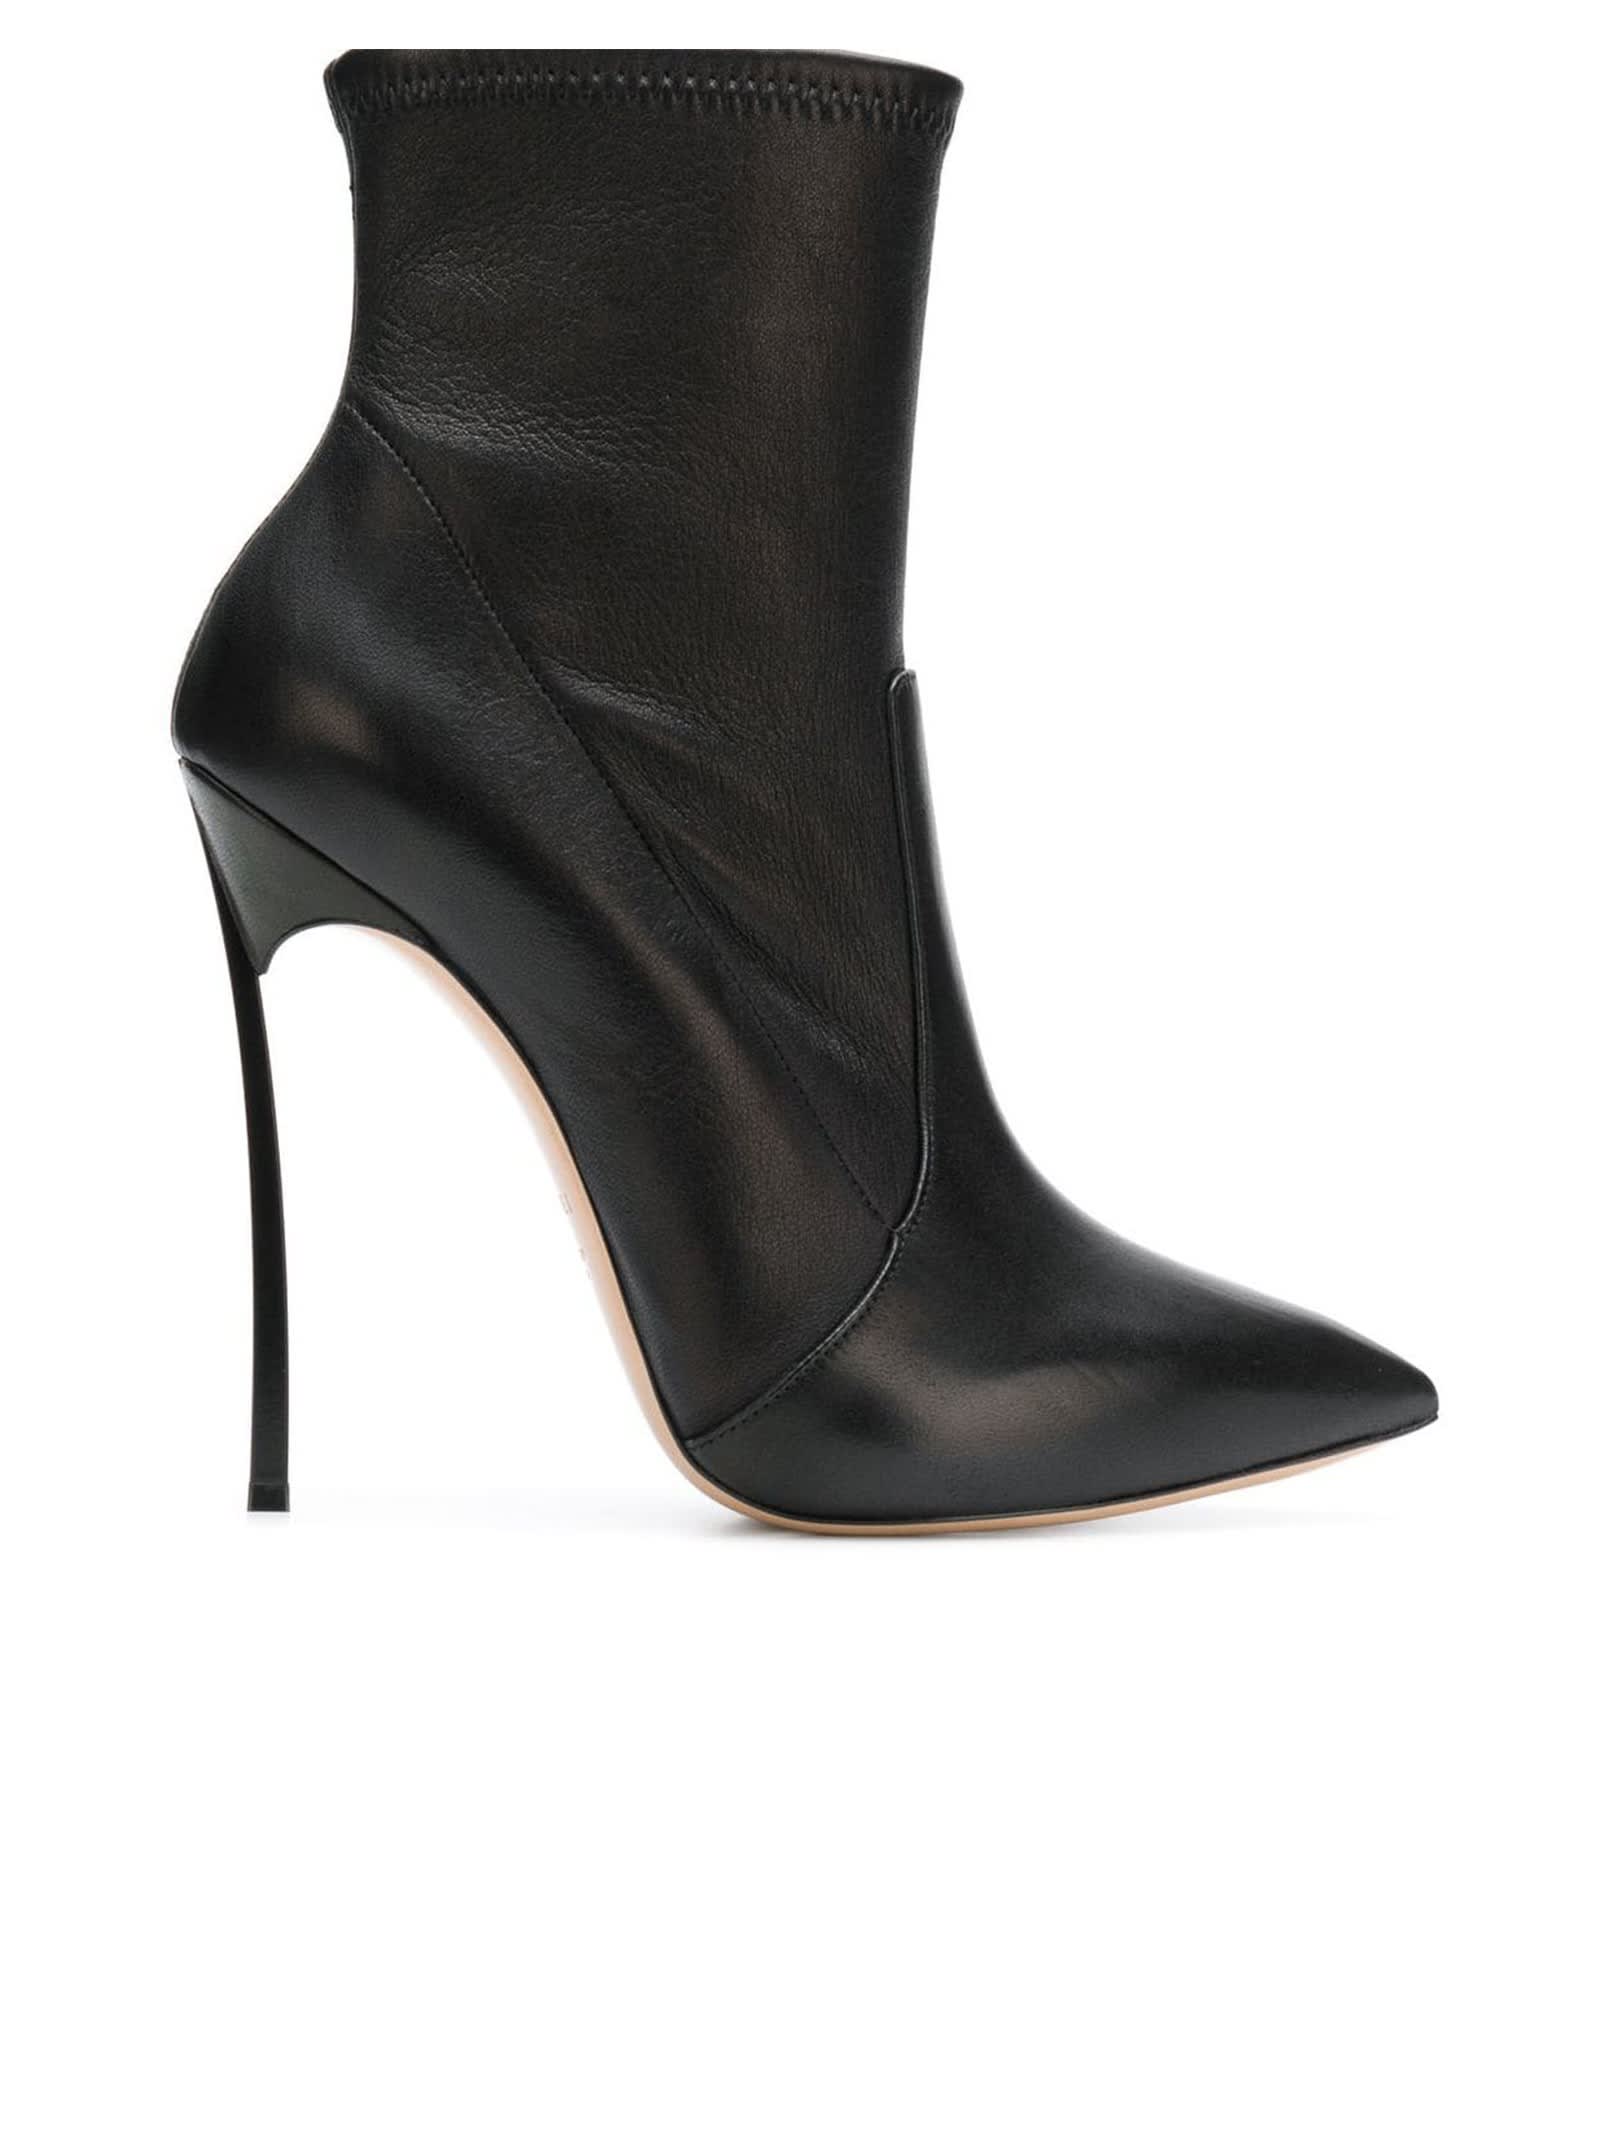 Casadei Black Leather Blade Ankle Boots